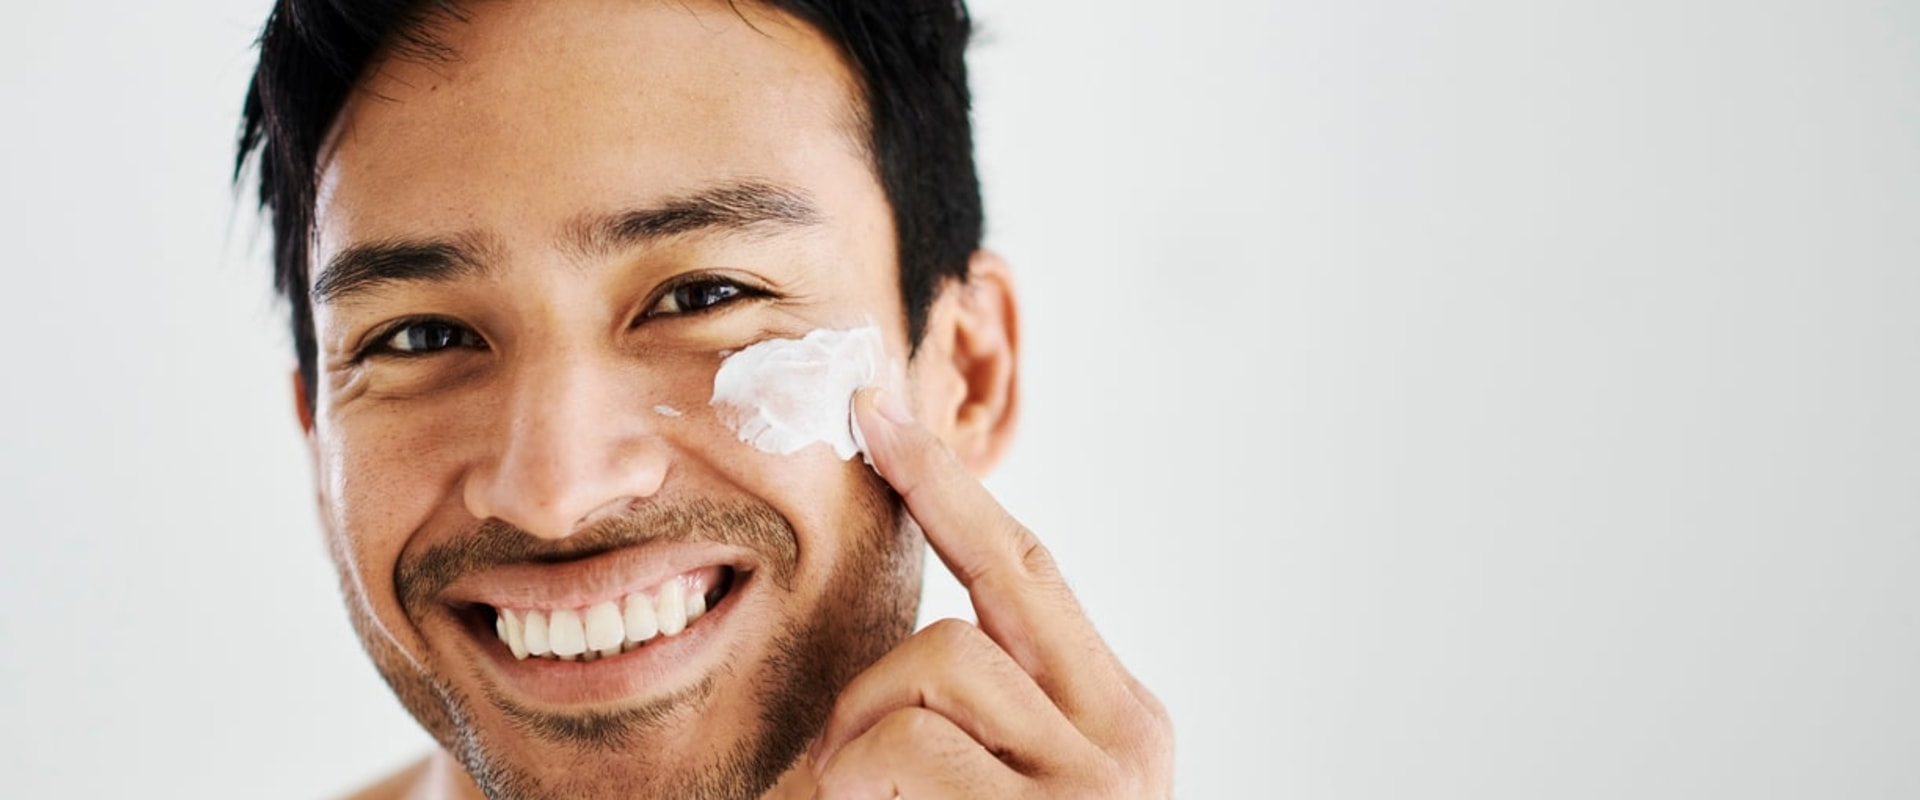 Best Products for Dry Skin: A Comprehensive Guide for Men's Skincare